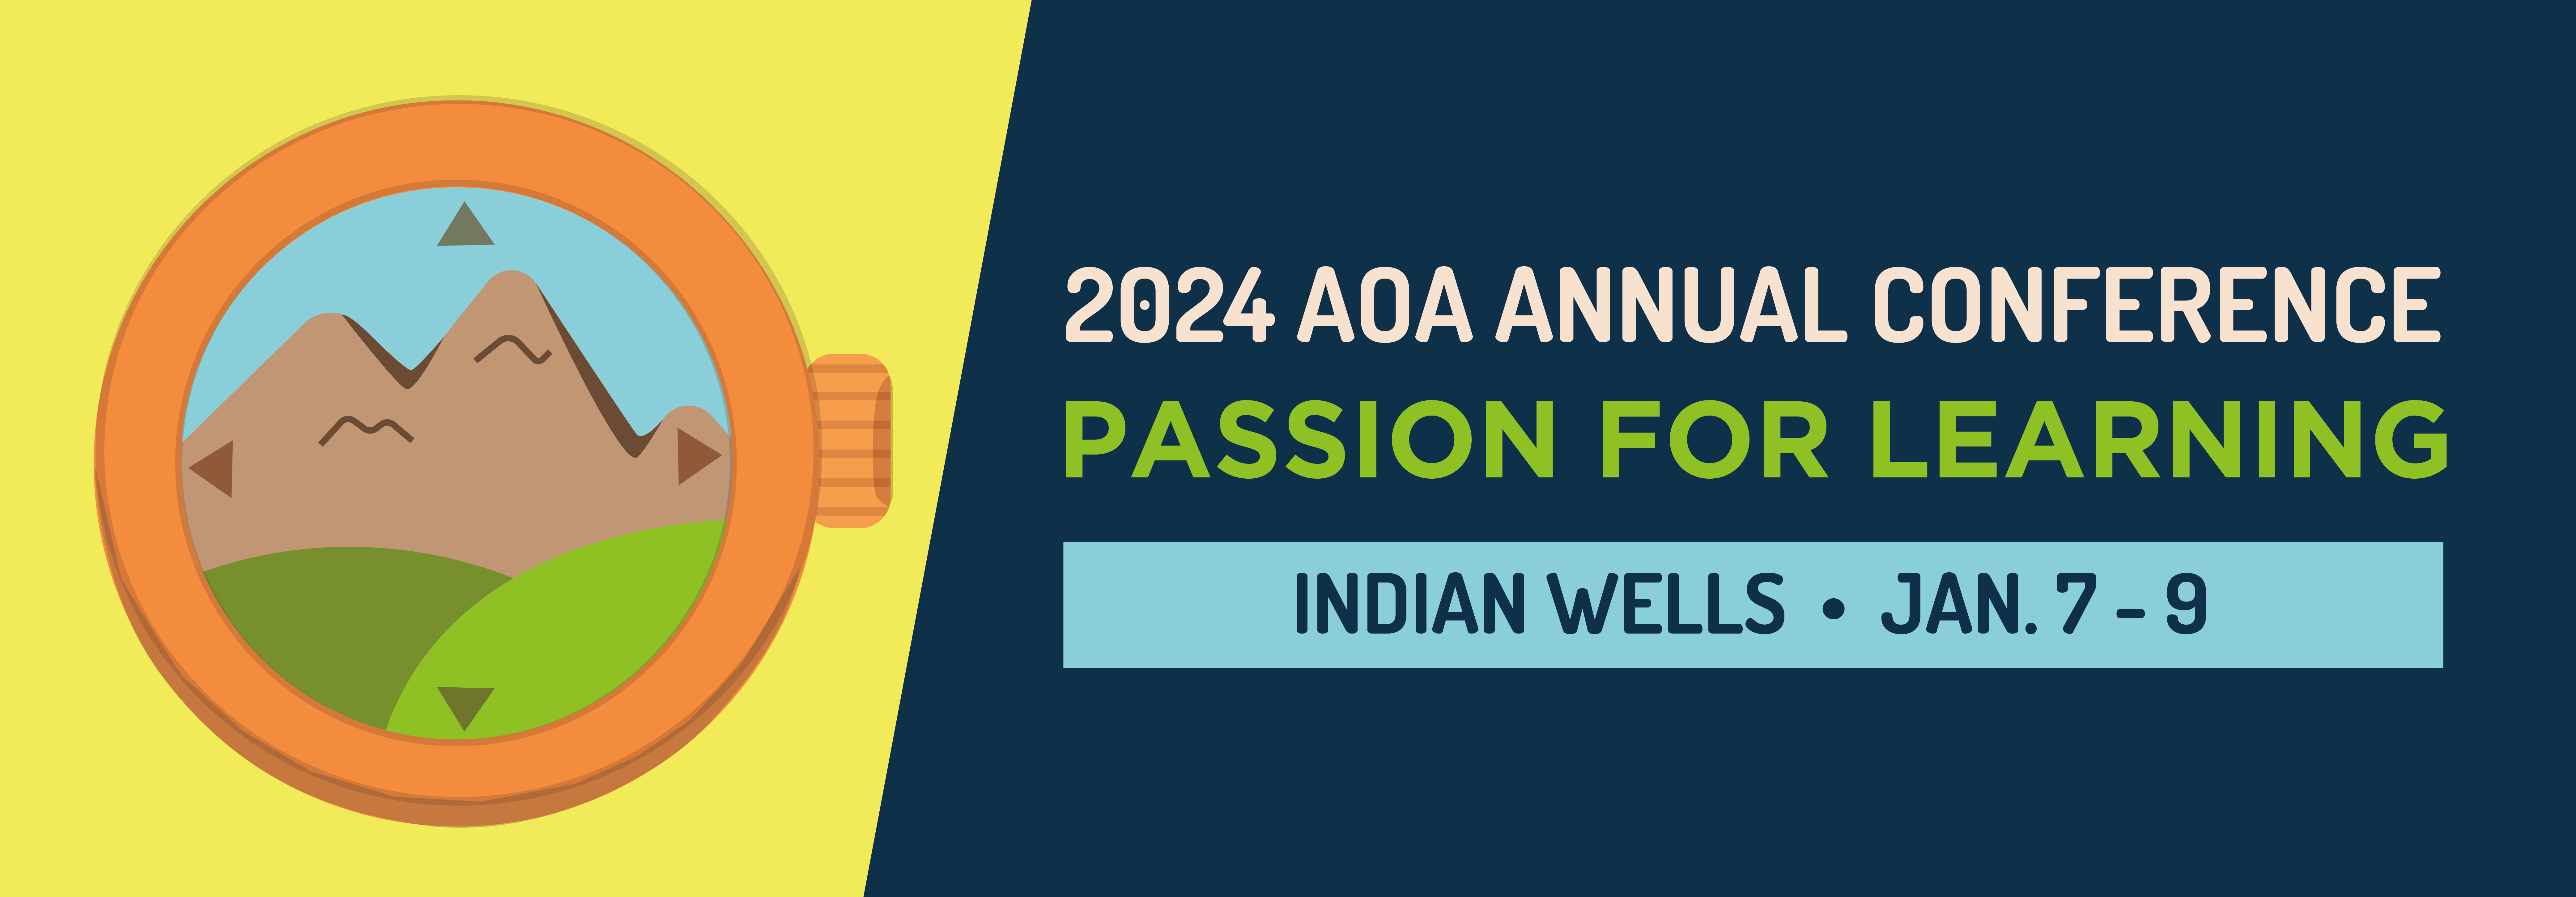 2024 AOA Conference Website